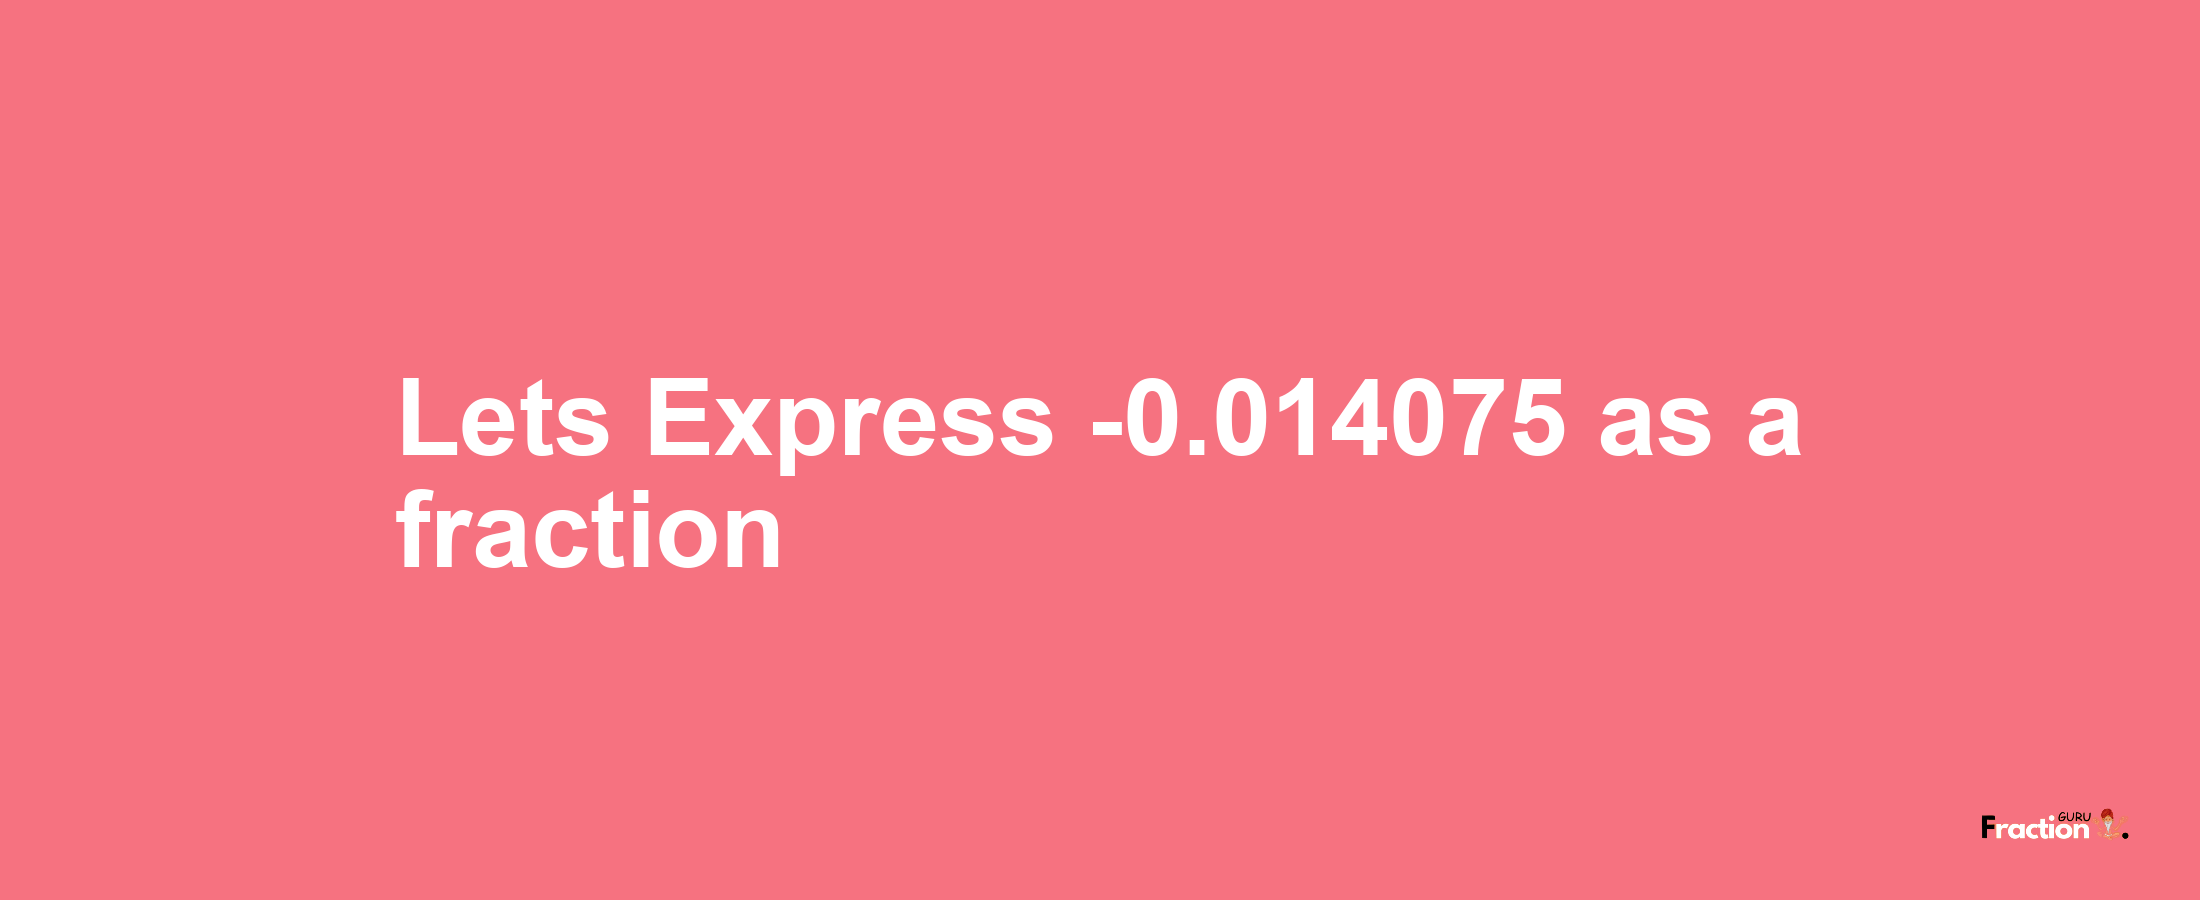 Lets Express -0.014075 as afraction